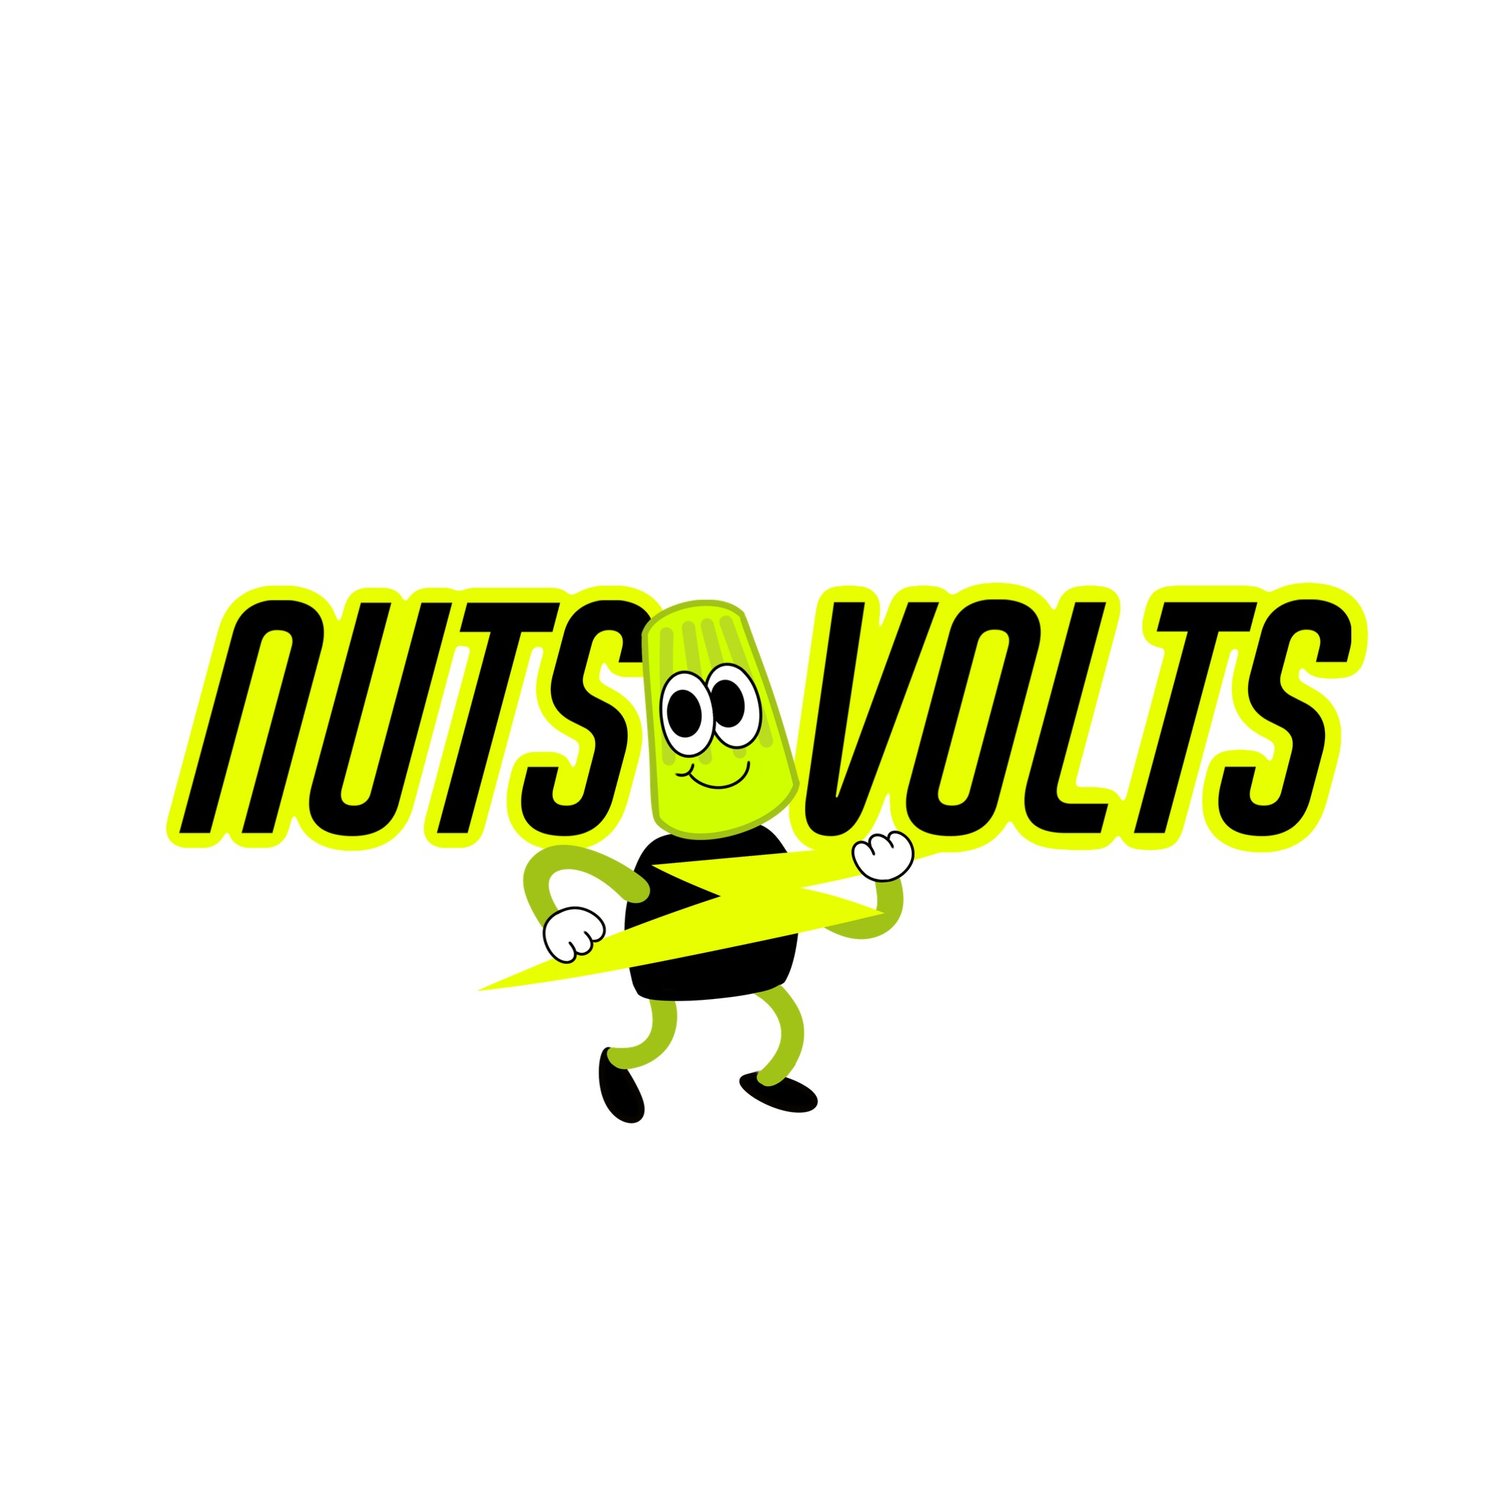 Nuts and Volts Electric